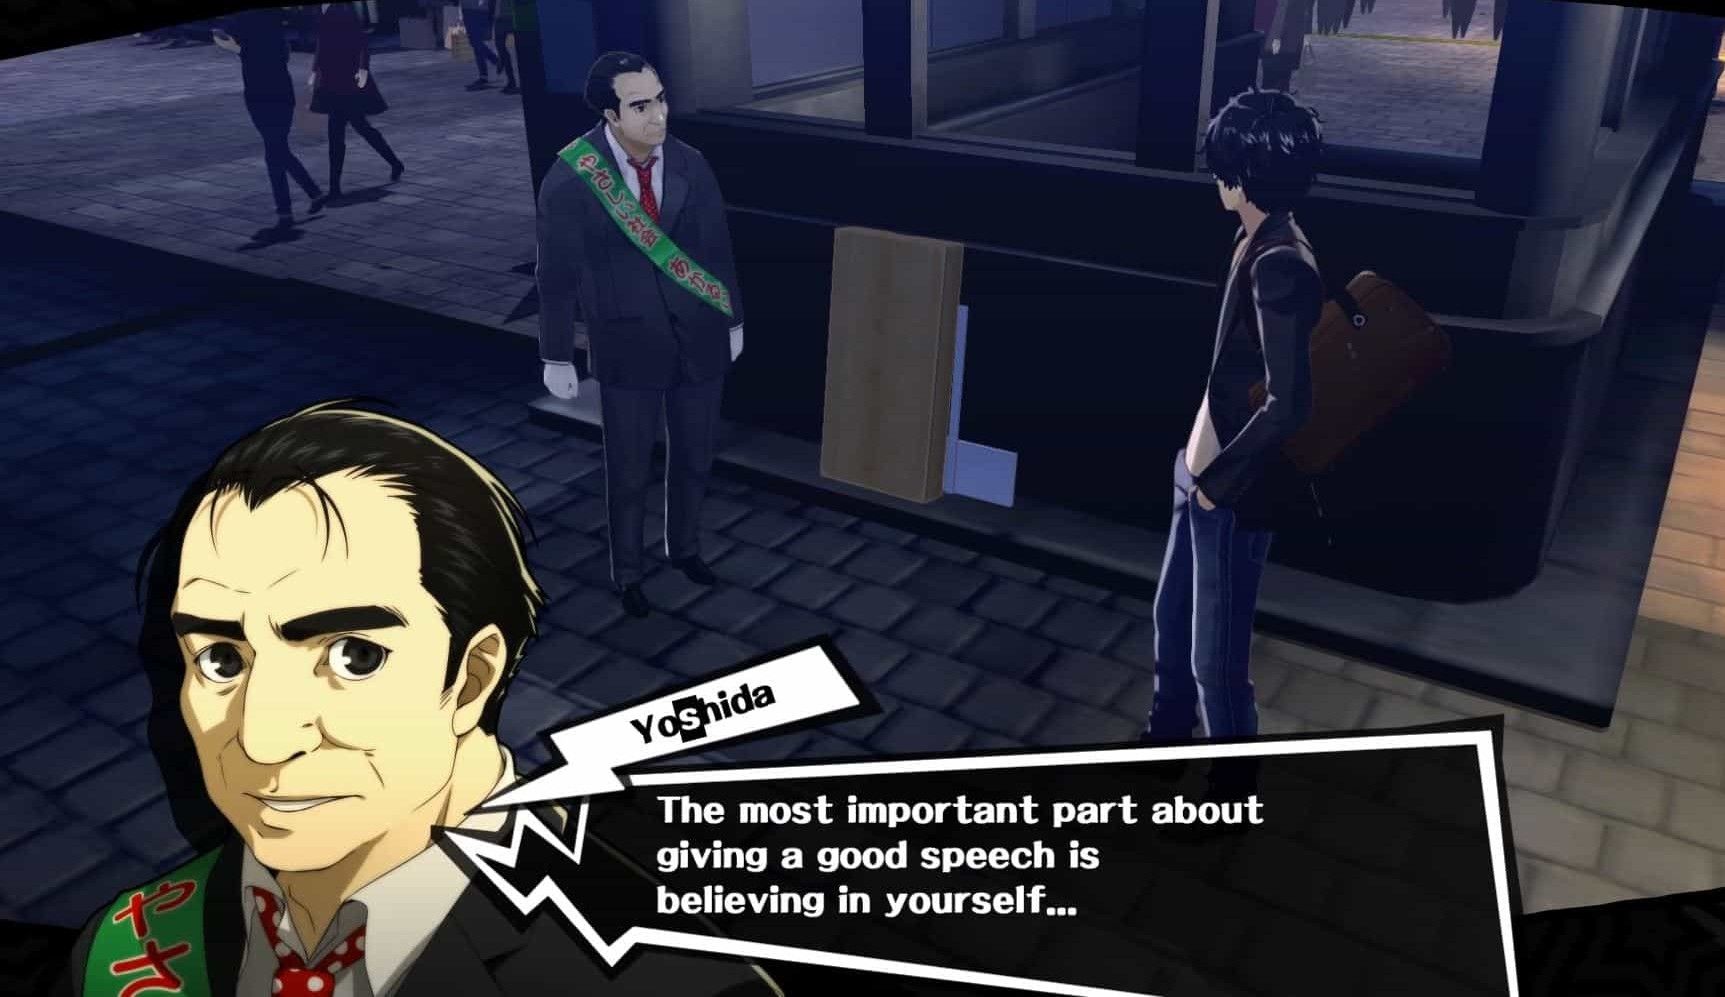 Yoshida telling the Joker in Persona 5 Royal that believing in yourself is key to a good speech